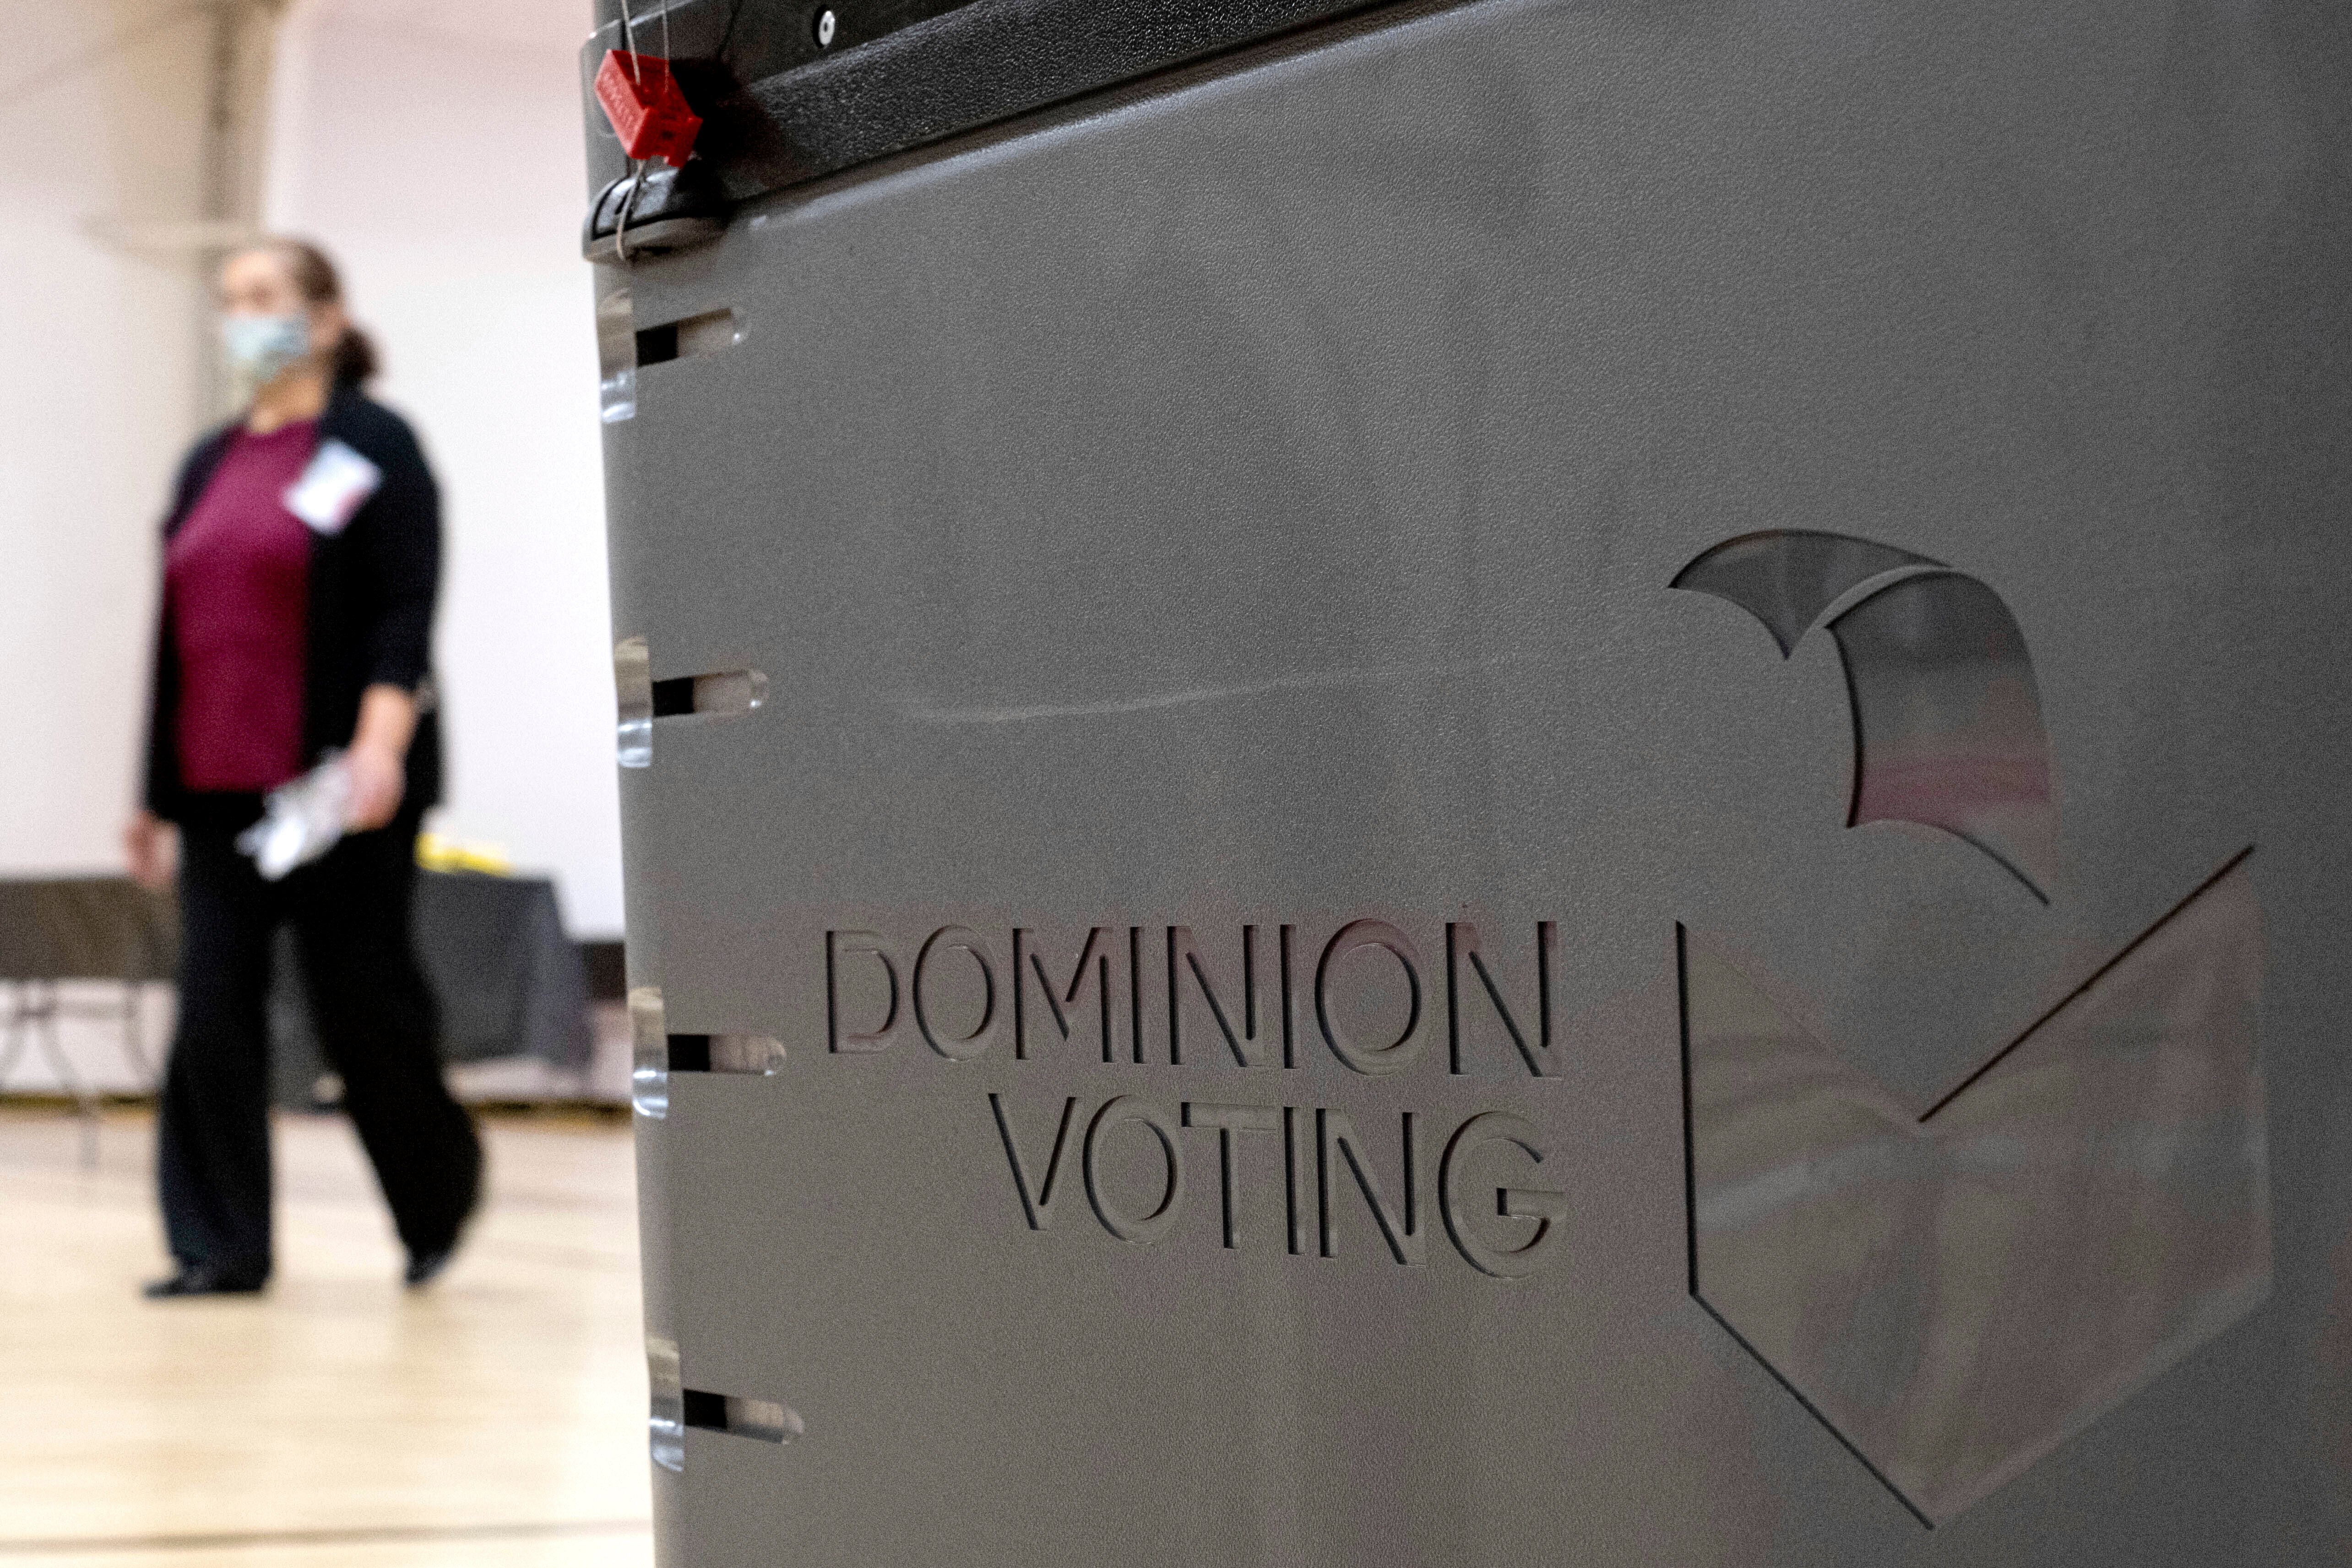 File. A worker passes a Dominion Voting ballot scanner while setting up a polling location at an elementary school in Gwinnett County, Ga., outside of Atlanta, on 4 January 2021